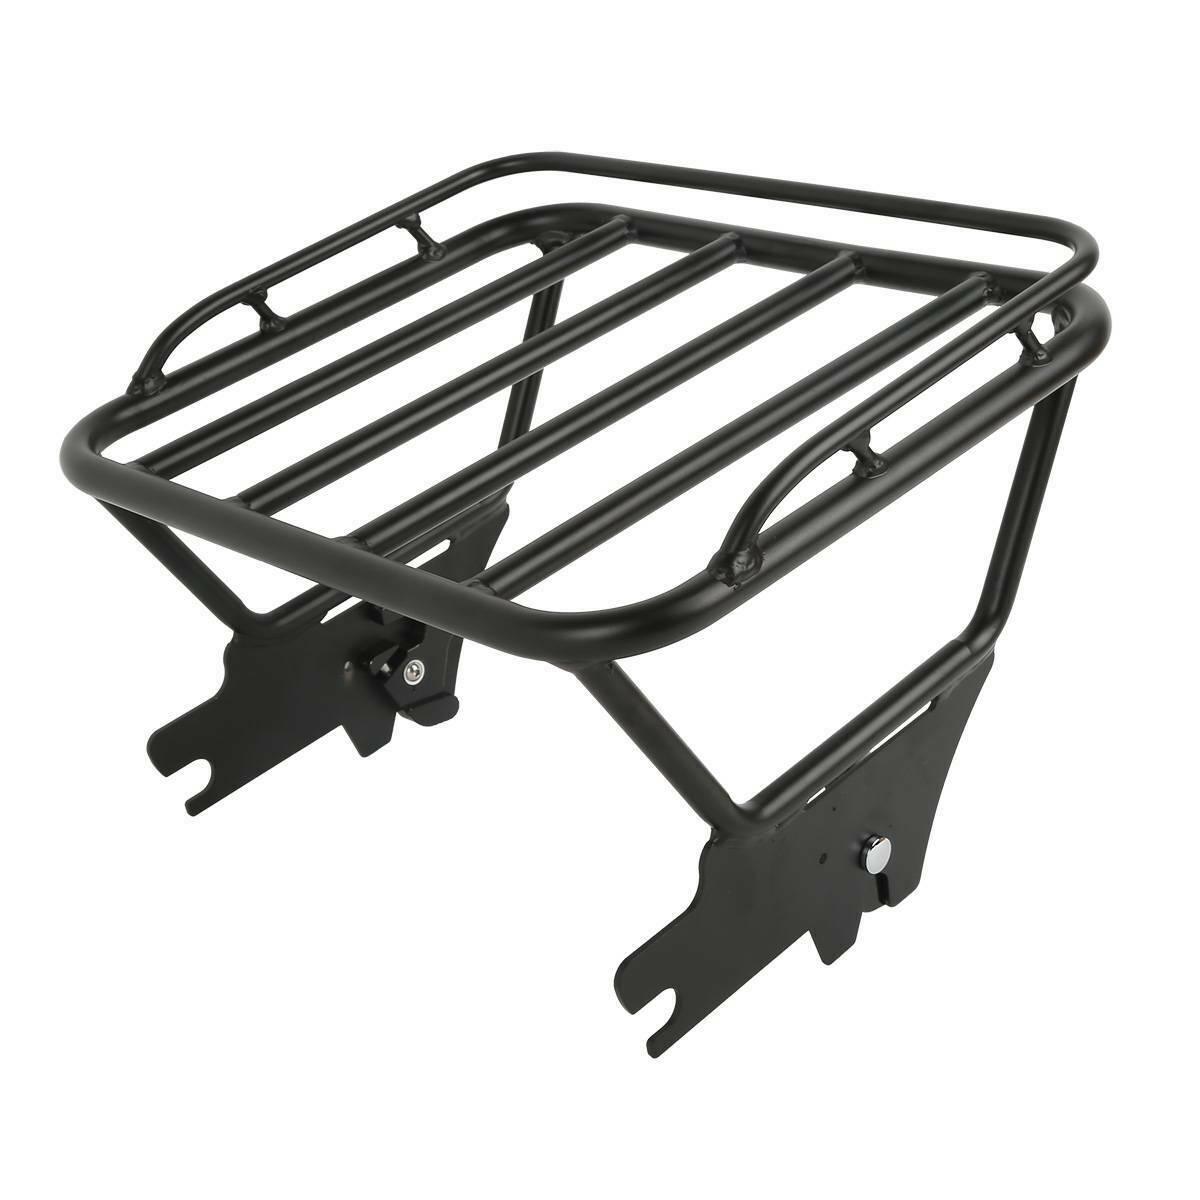 Dull Black 2 Up Luggage Rack Docking Hardware Fit For Harley Touring Glide 97-08 - Moto Life Products